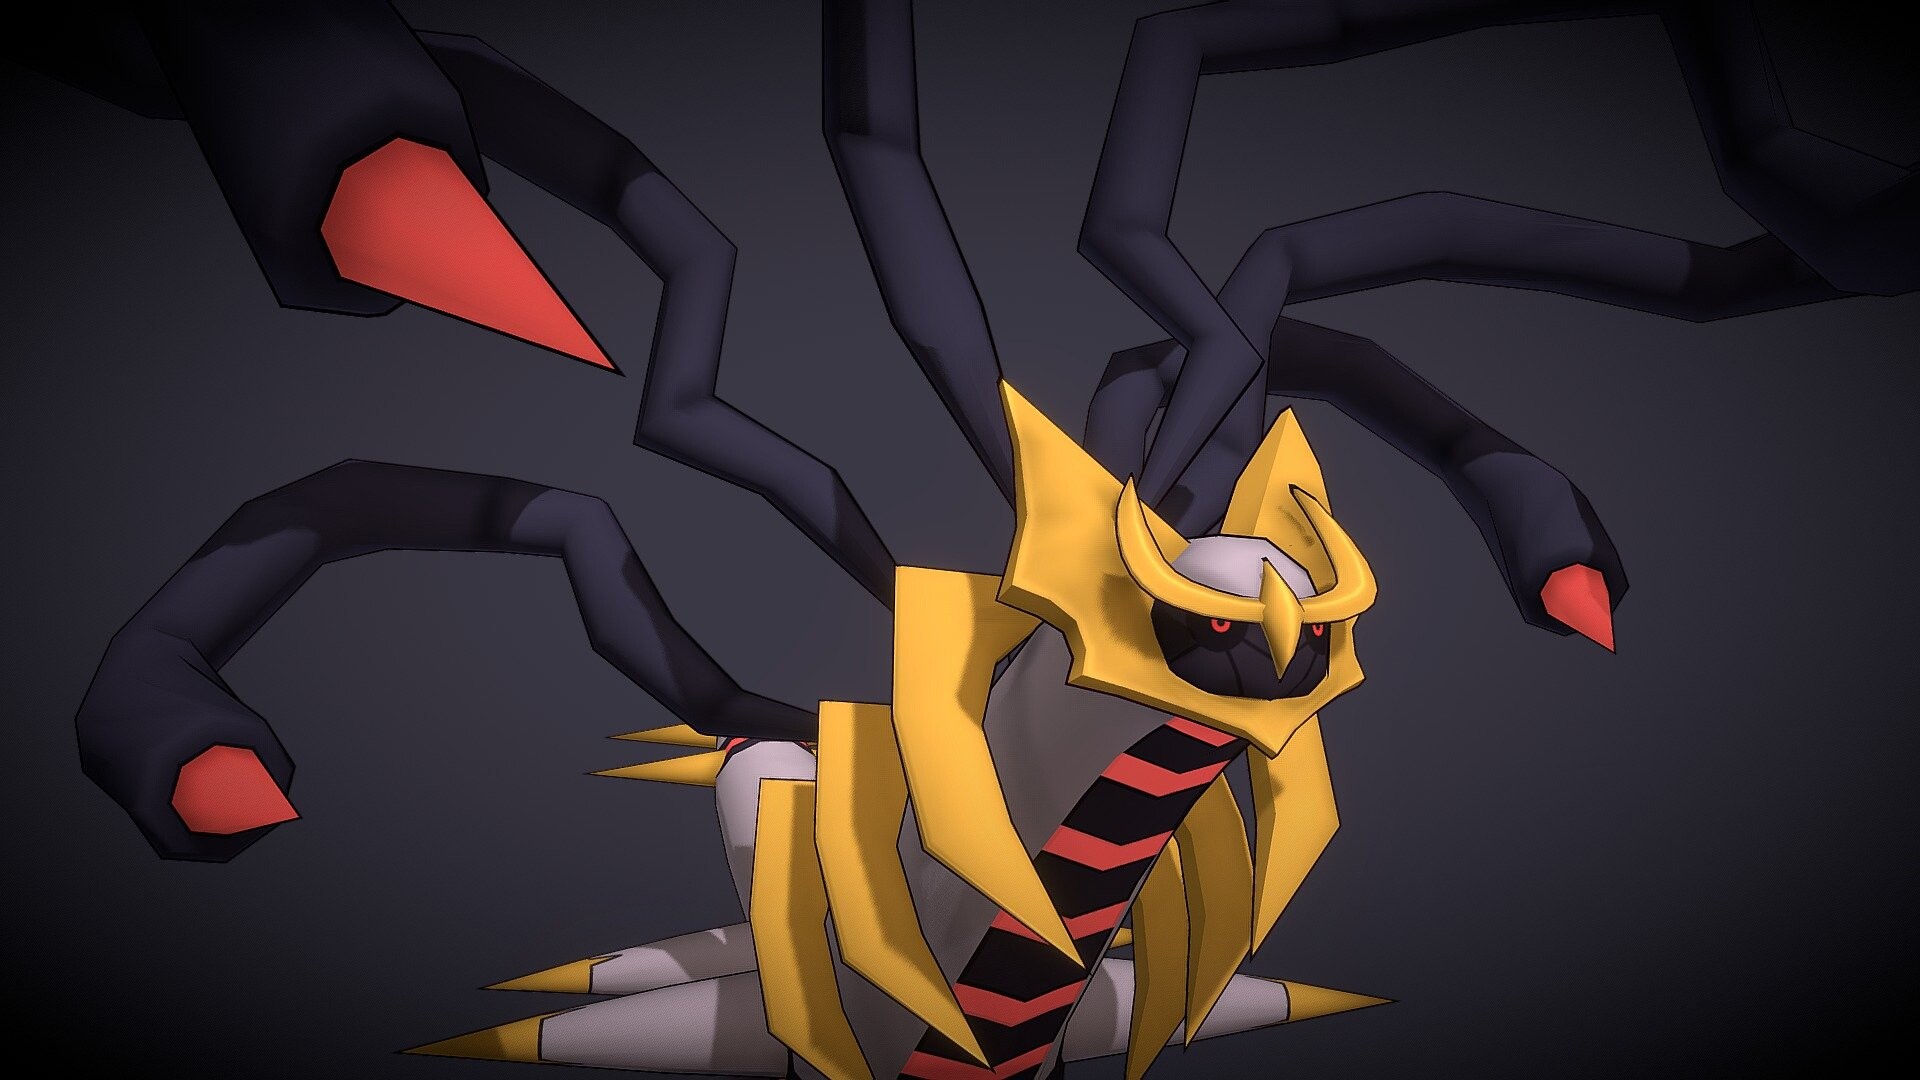 Giratina: Legs are reduced to golden-tipped spikes, Four additional golden spikes near the edge of its tail, Origin Forme. 1920x1080 Full HD Background.